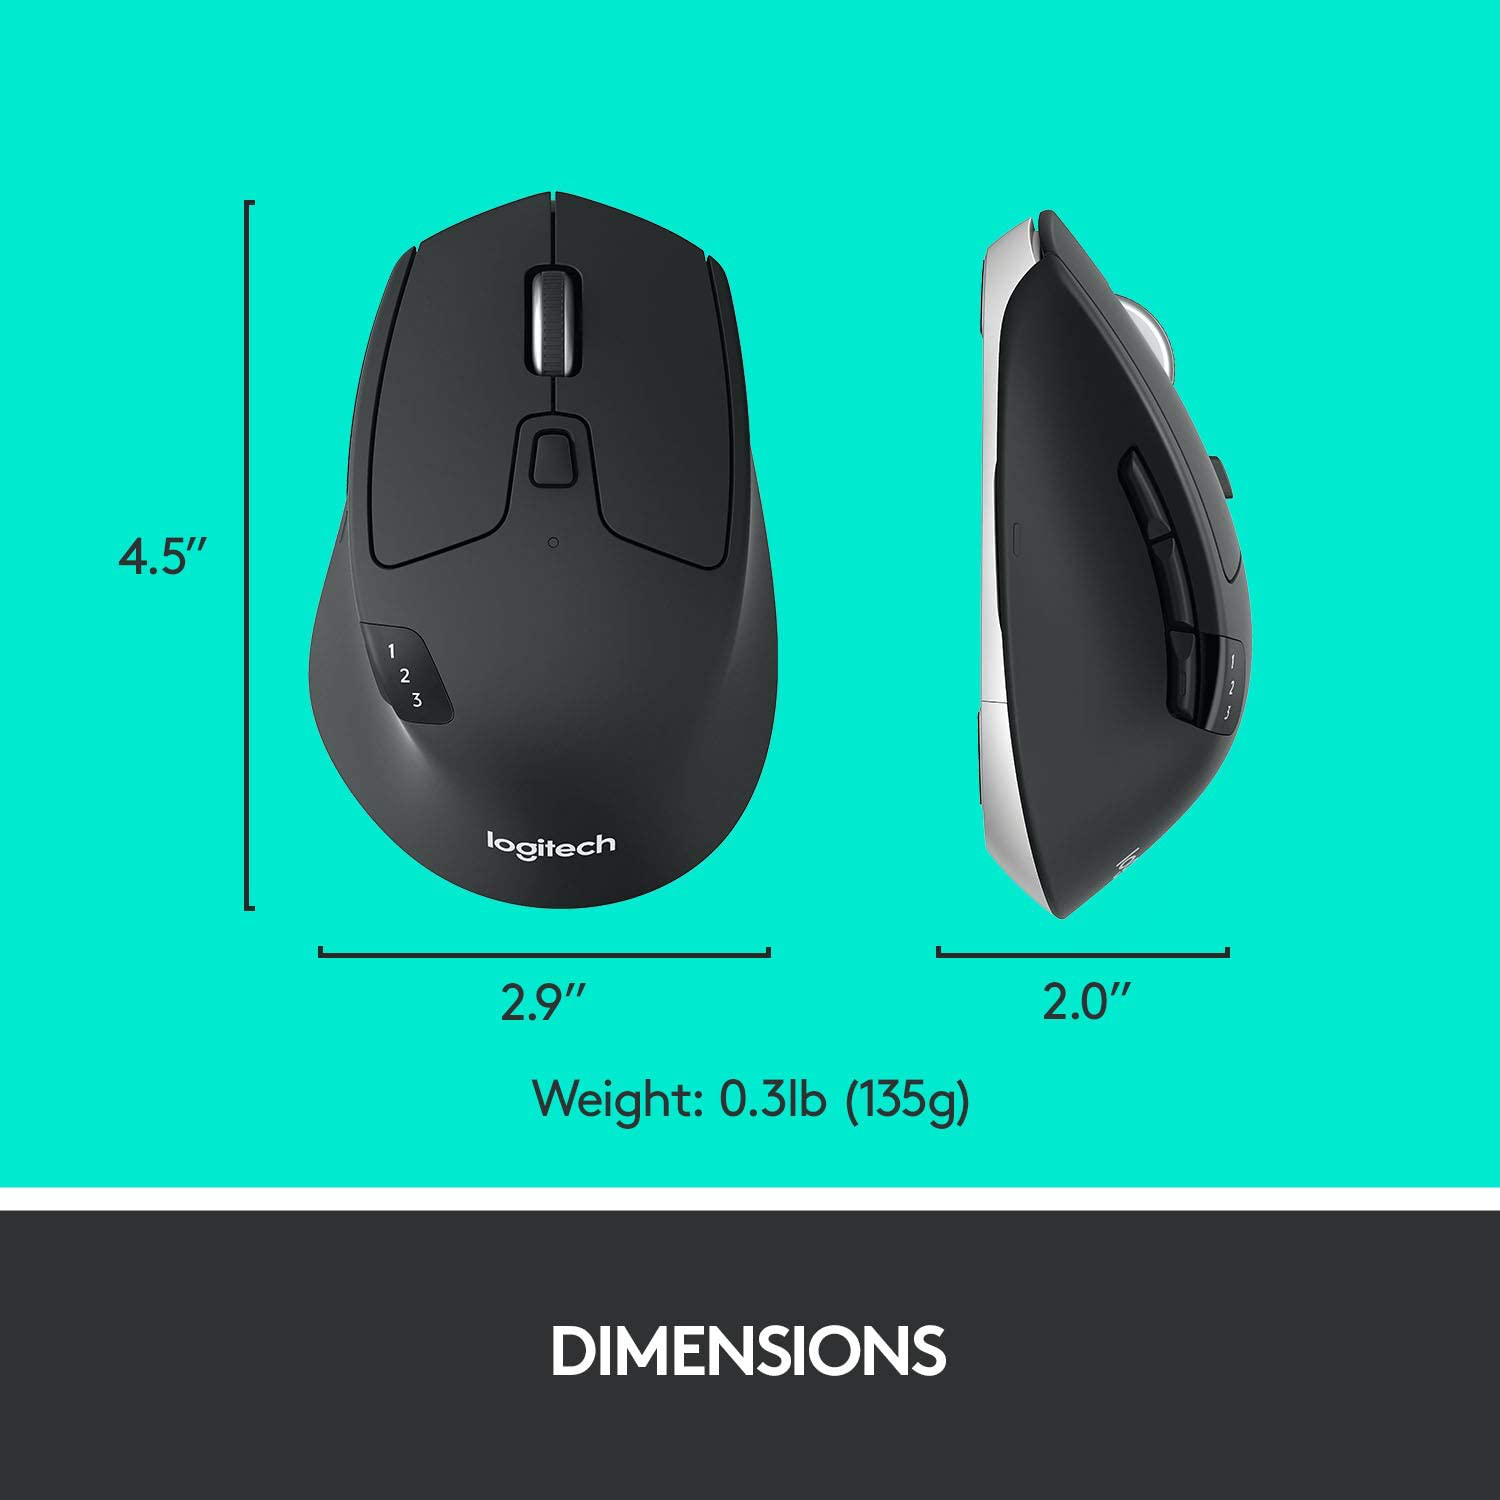 Logitech M720 Triathalon Multi-Device Wireless Mouse – Easily Move Text, Images and Files between 3 Windows and Apple Mac Computers Paired with Bluetooth or USB, Hyper-Fast Scrolling, Black